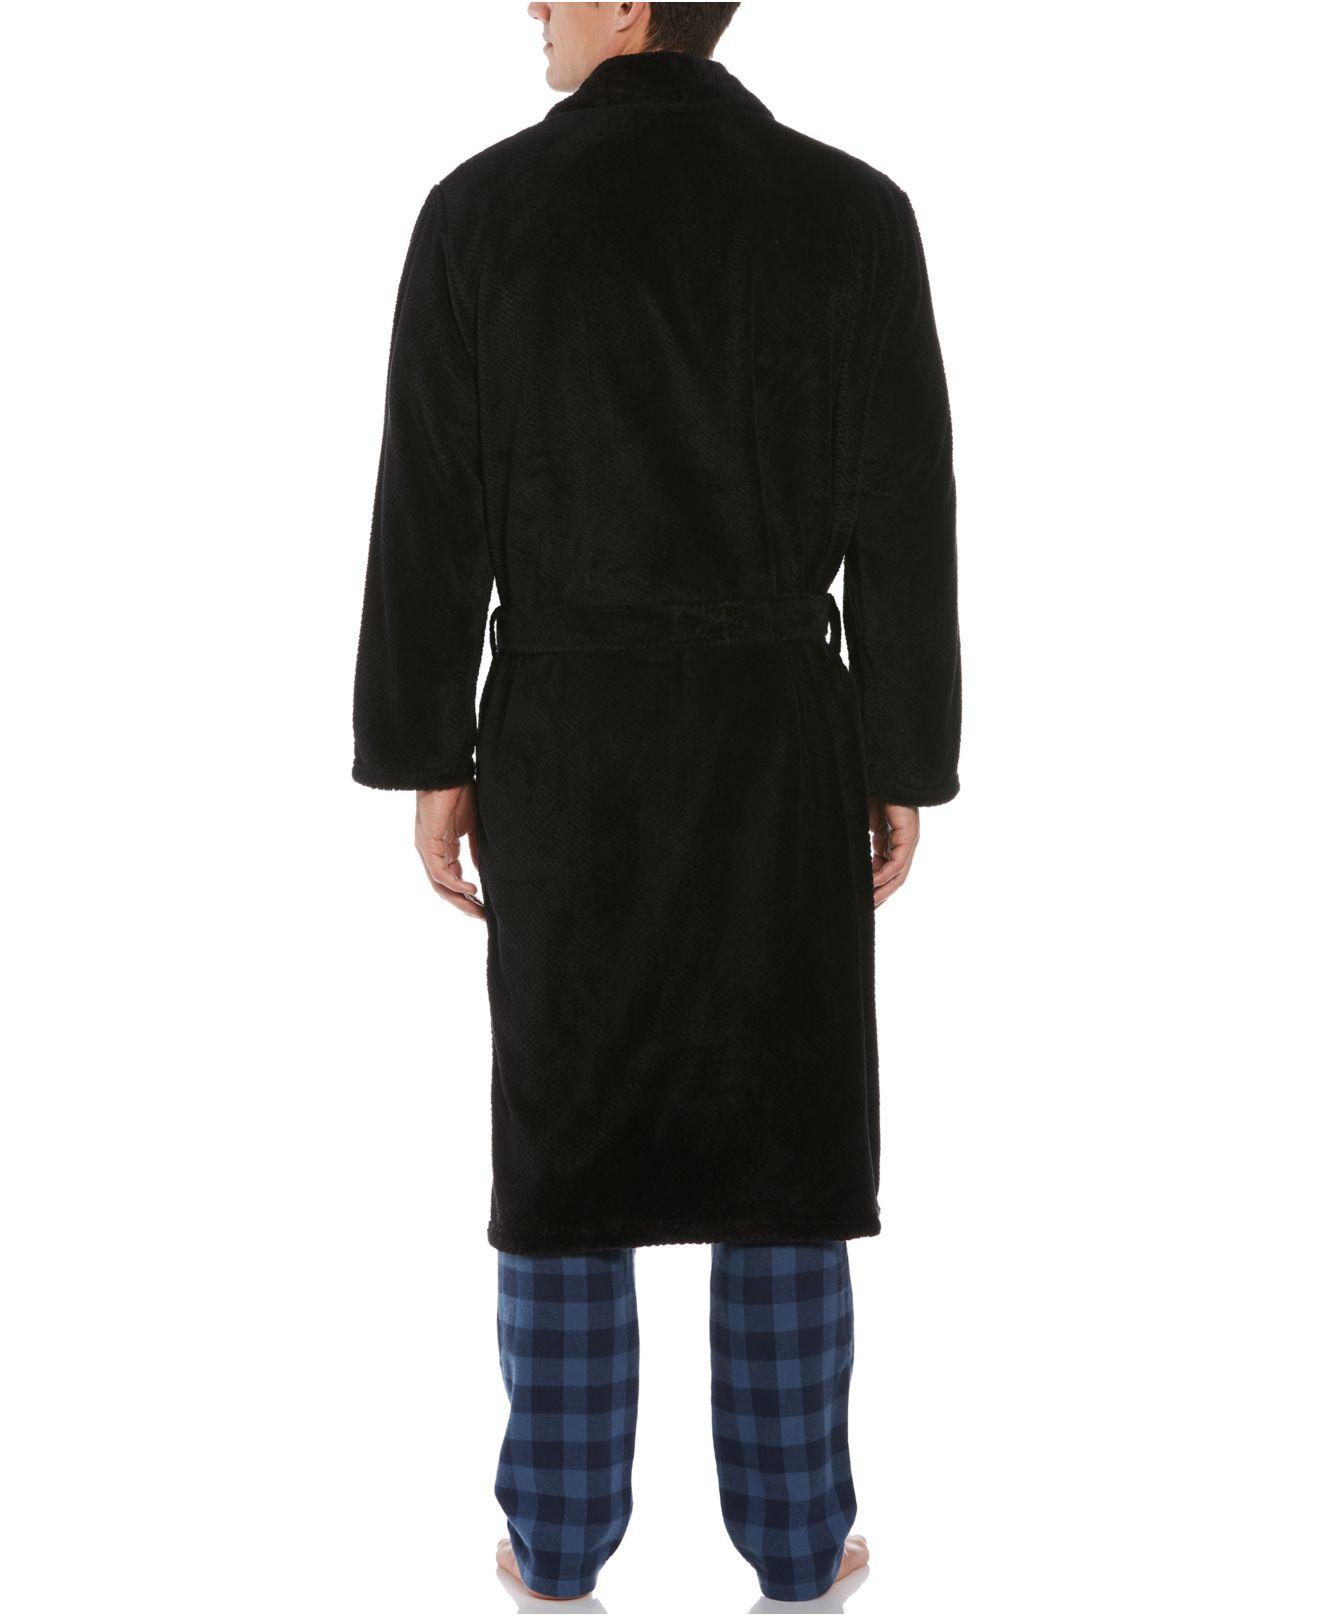 Perry Ellis Portfolio Synthetic Plush Banded Robe in Black for Men - Lyst